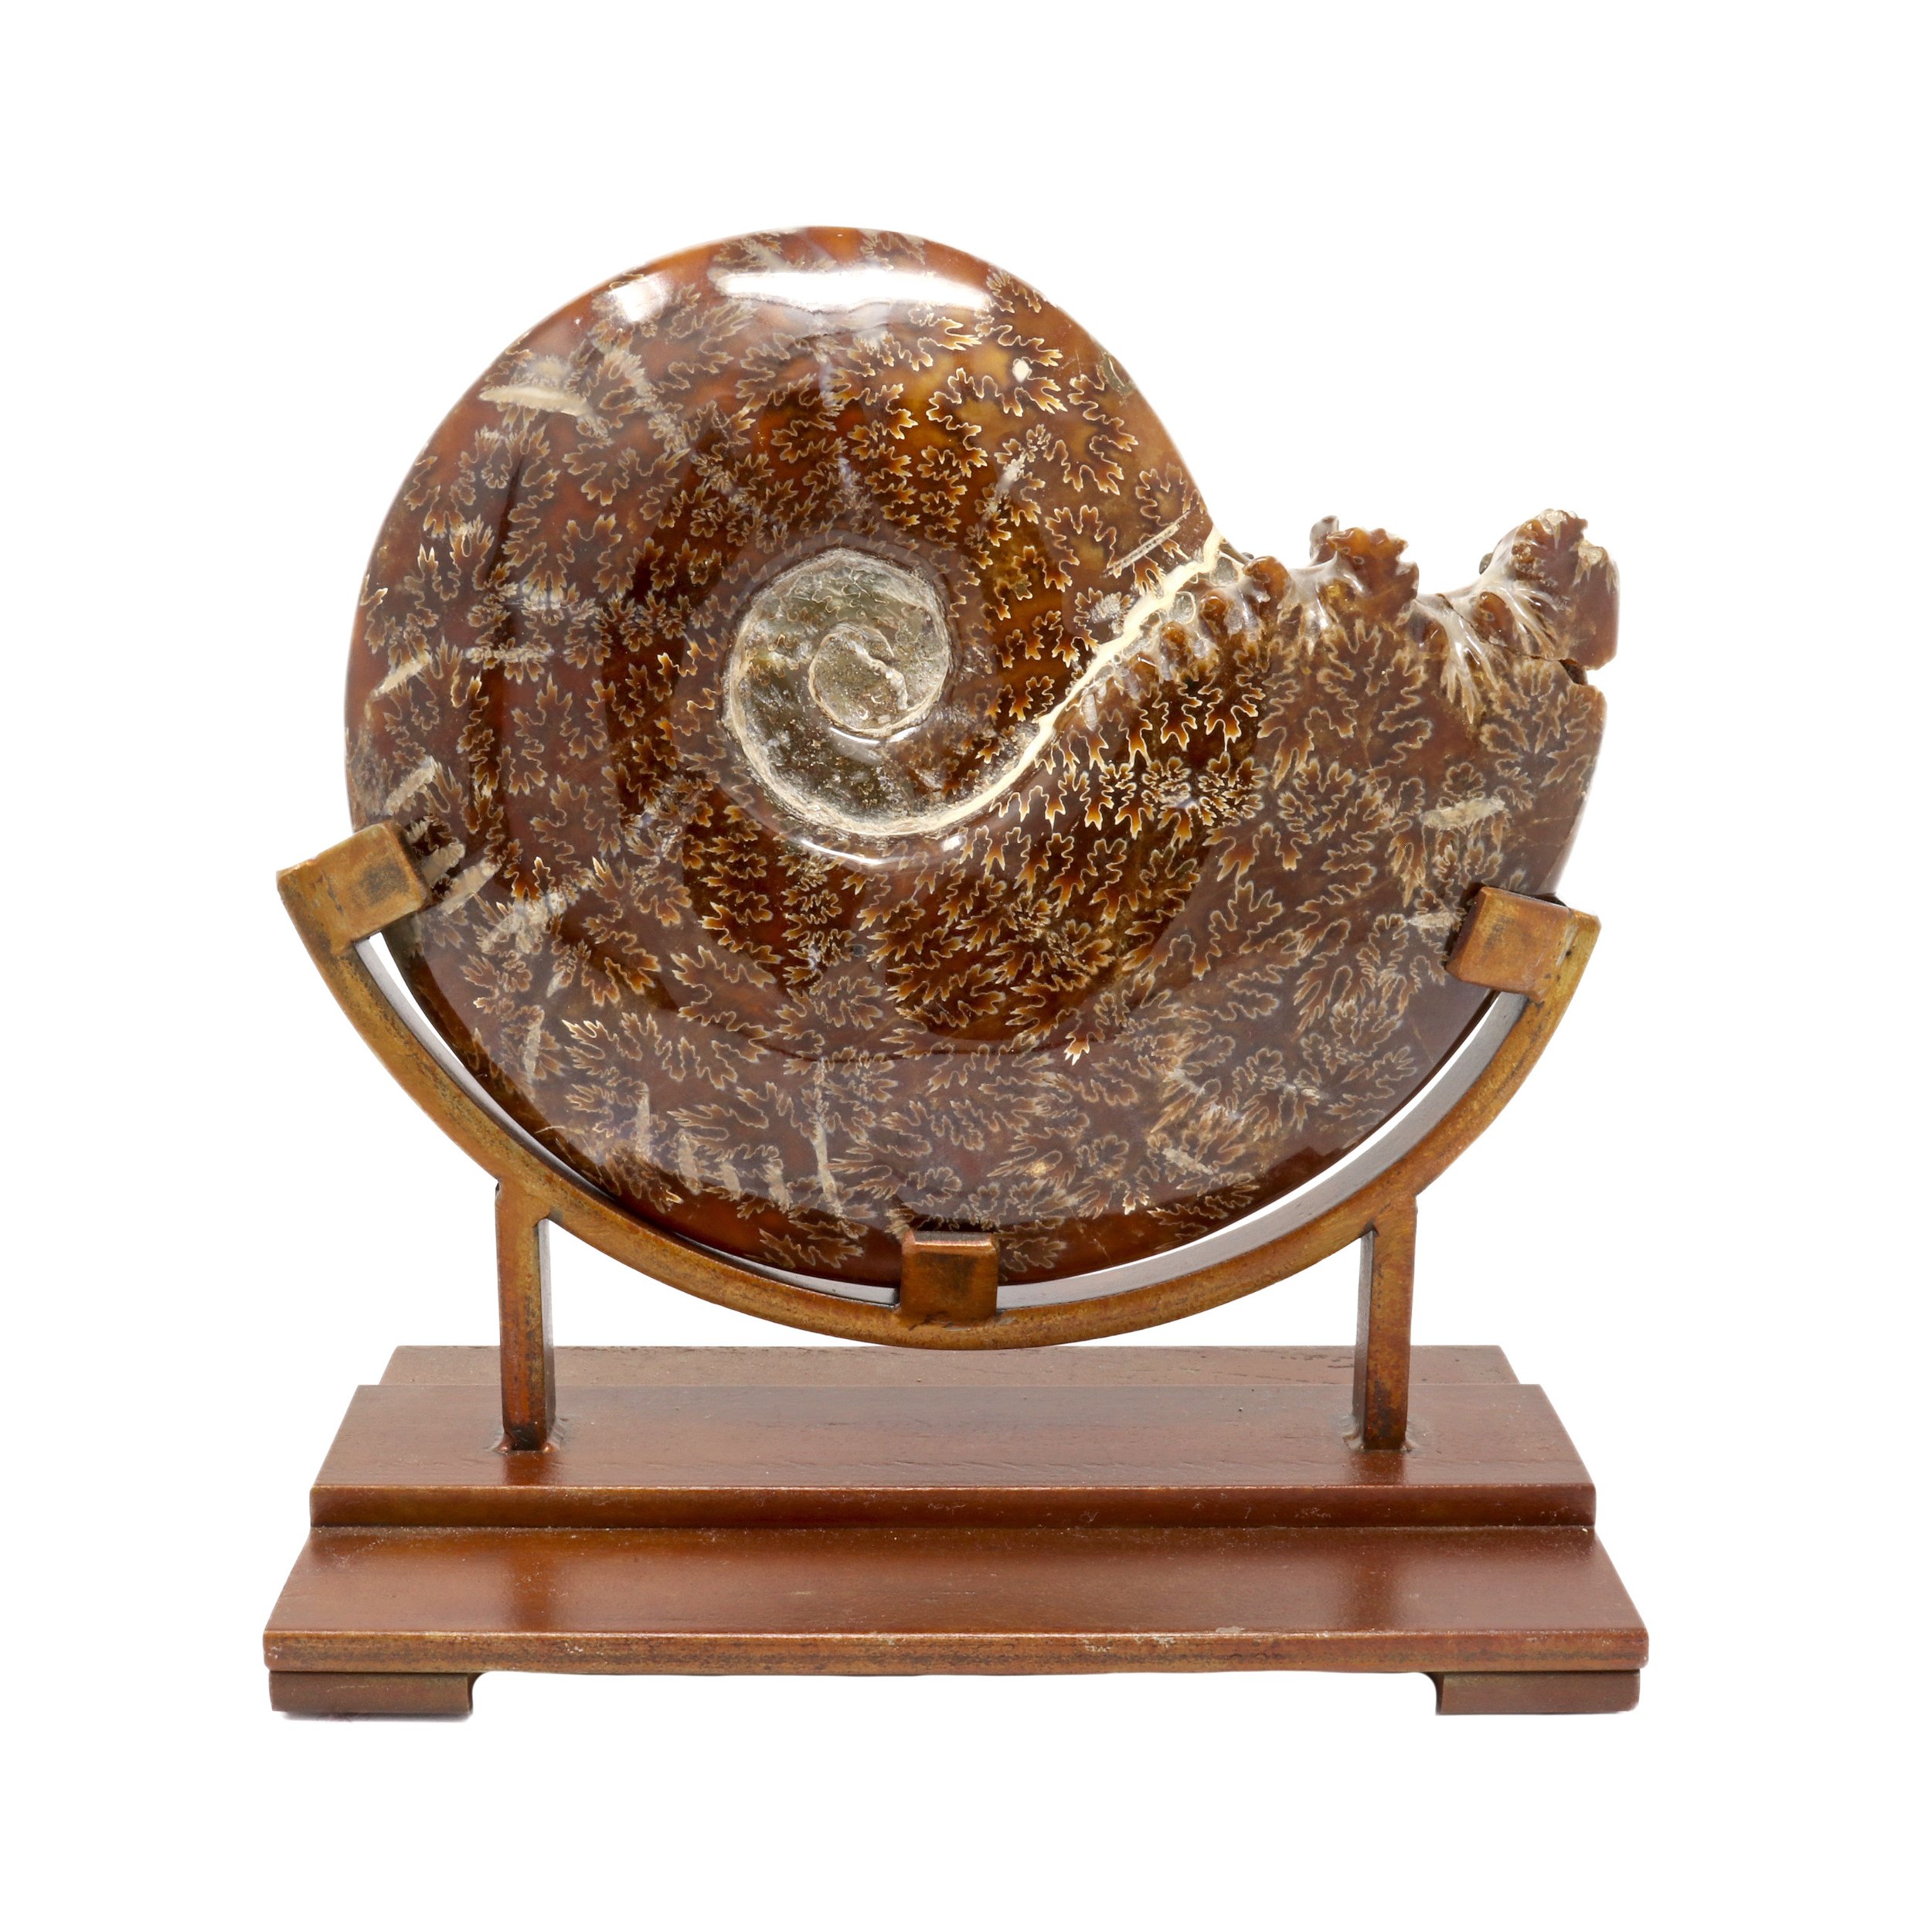 Ammonite Fossil Whole Features Sutures On Custom Stand